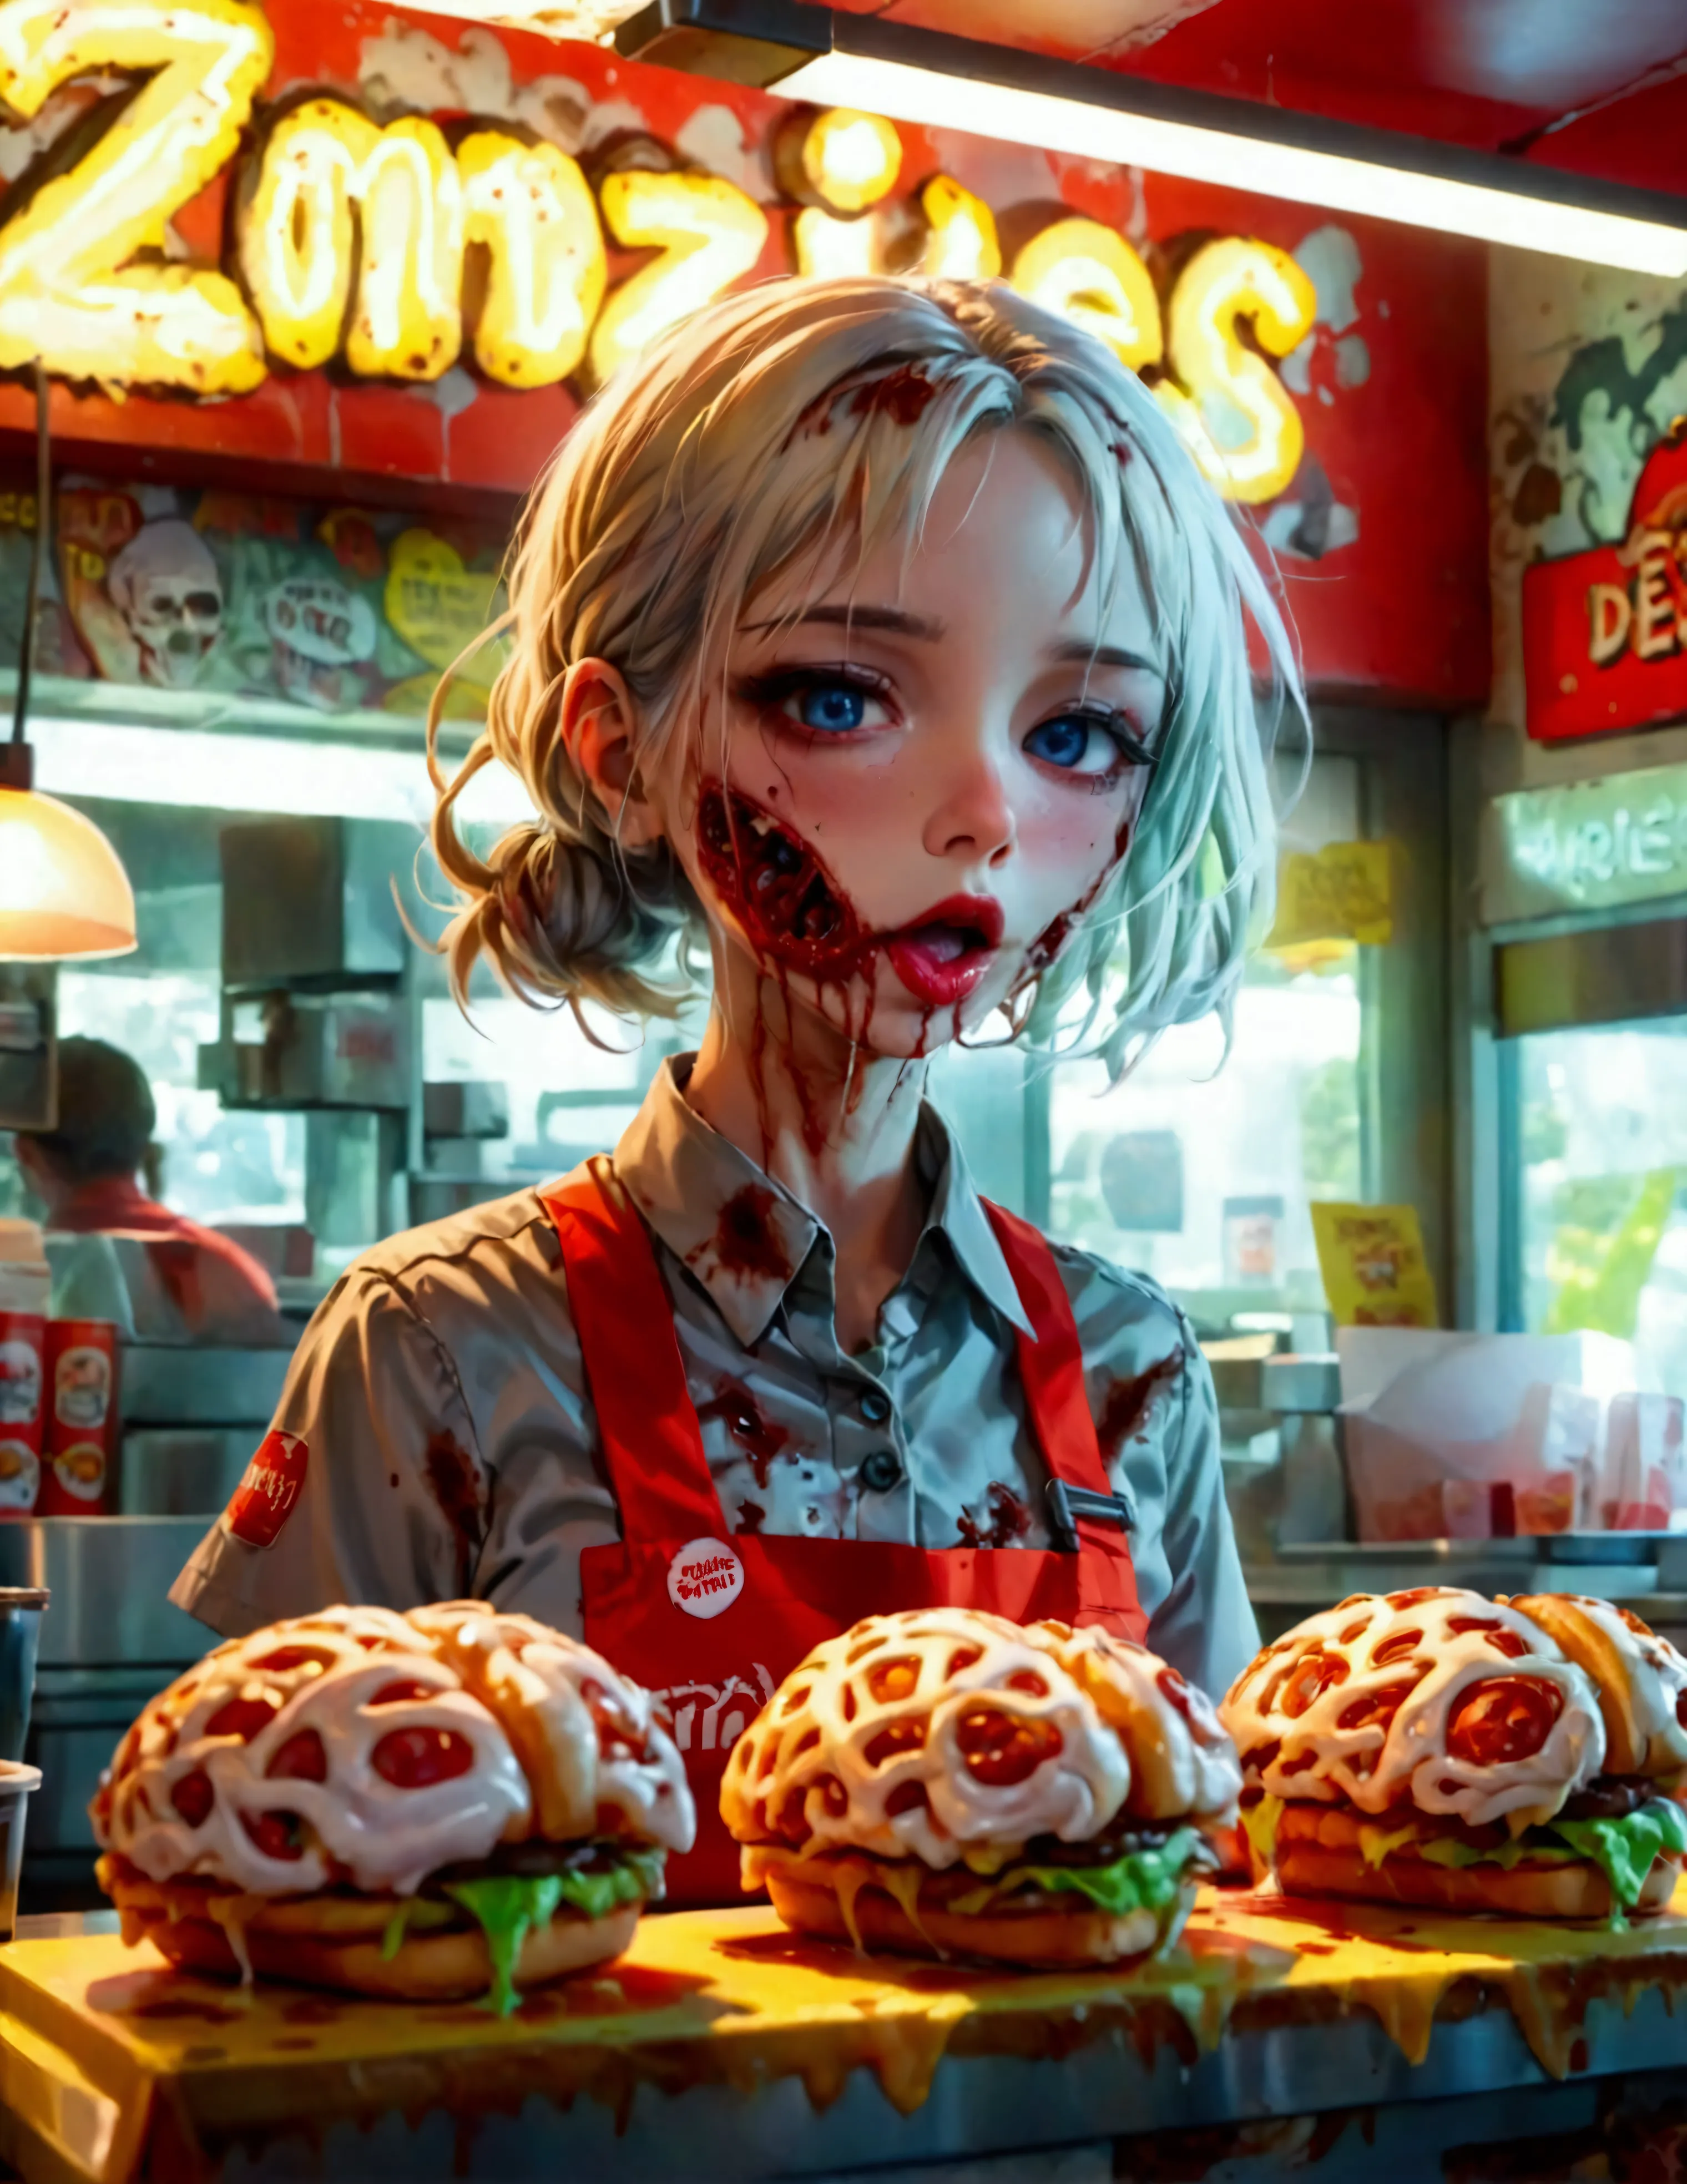 A friendly zombie fast food worker (cute woman, mouth stitched shut some decay, death pallor, work uniform) working behind a cou...